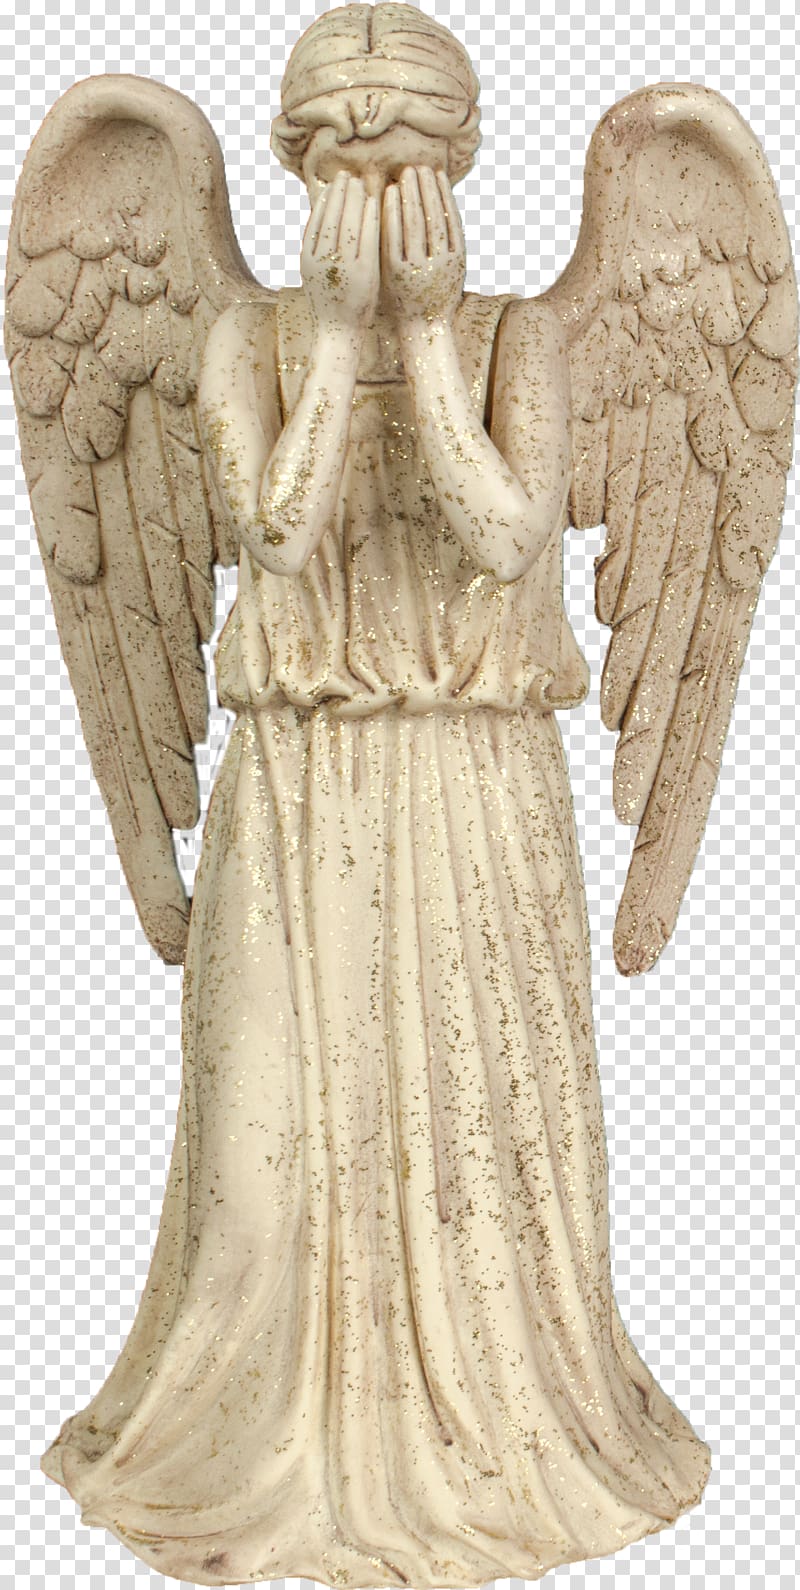 Tree-topper Christmas ornament Weeping Angel, Angels transparent background PNG clipart